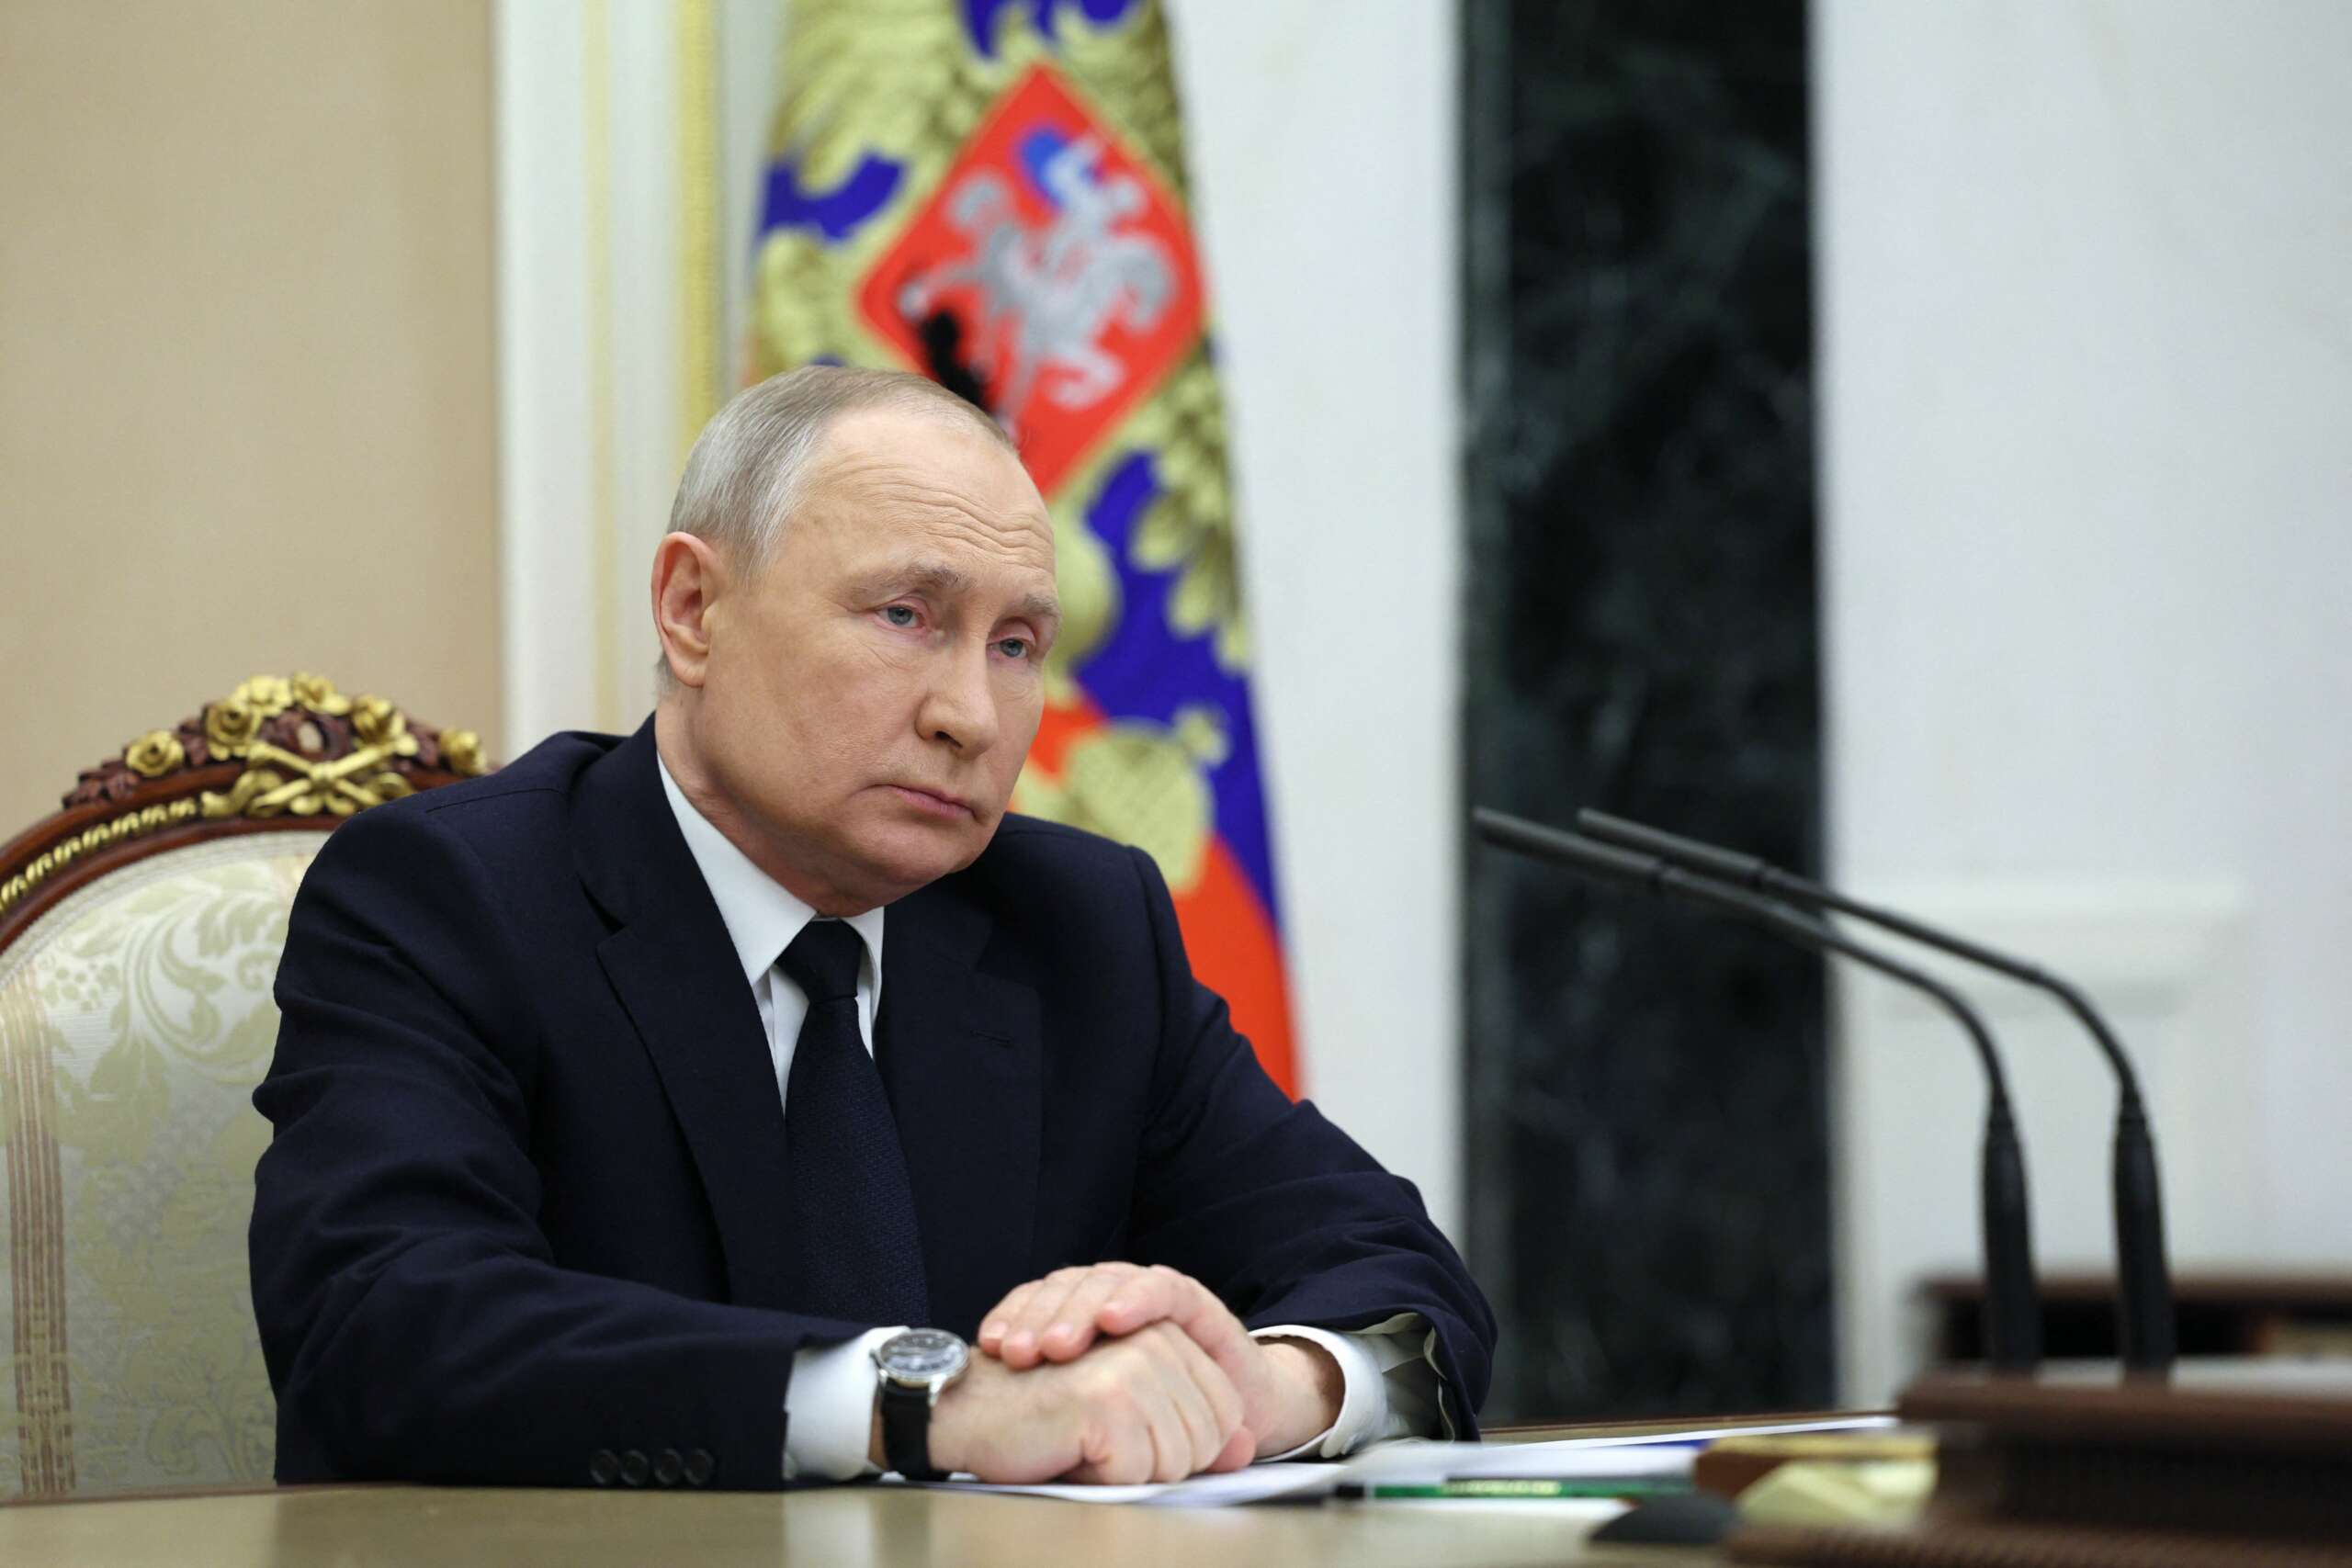 Russian President Vladimir Putin attends a meeting at the Kremlin in Moscow on March 25, 2023.